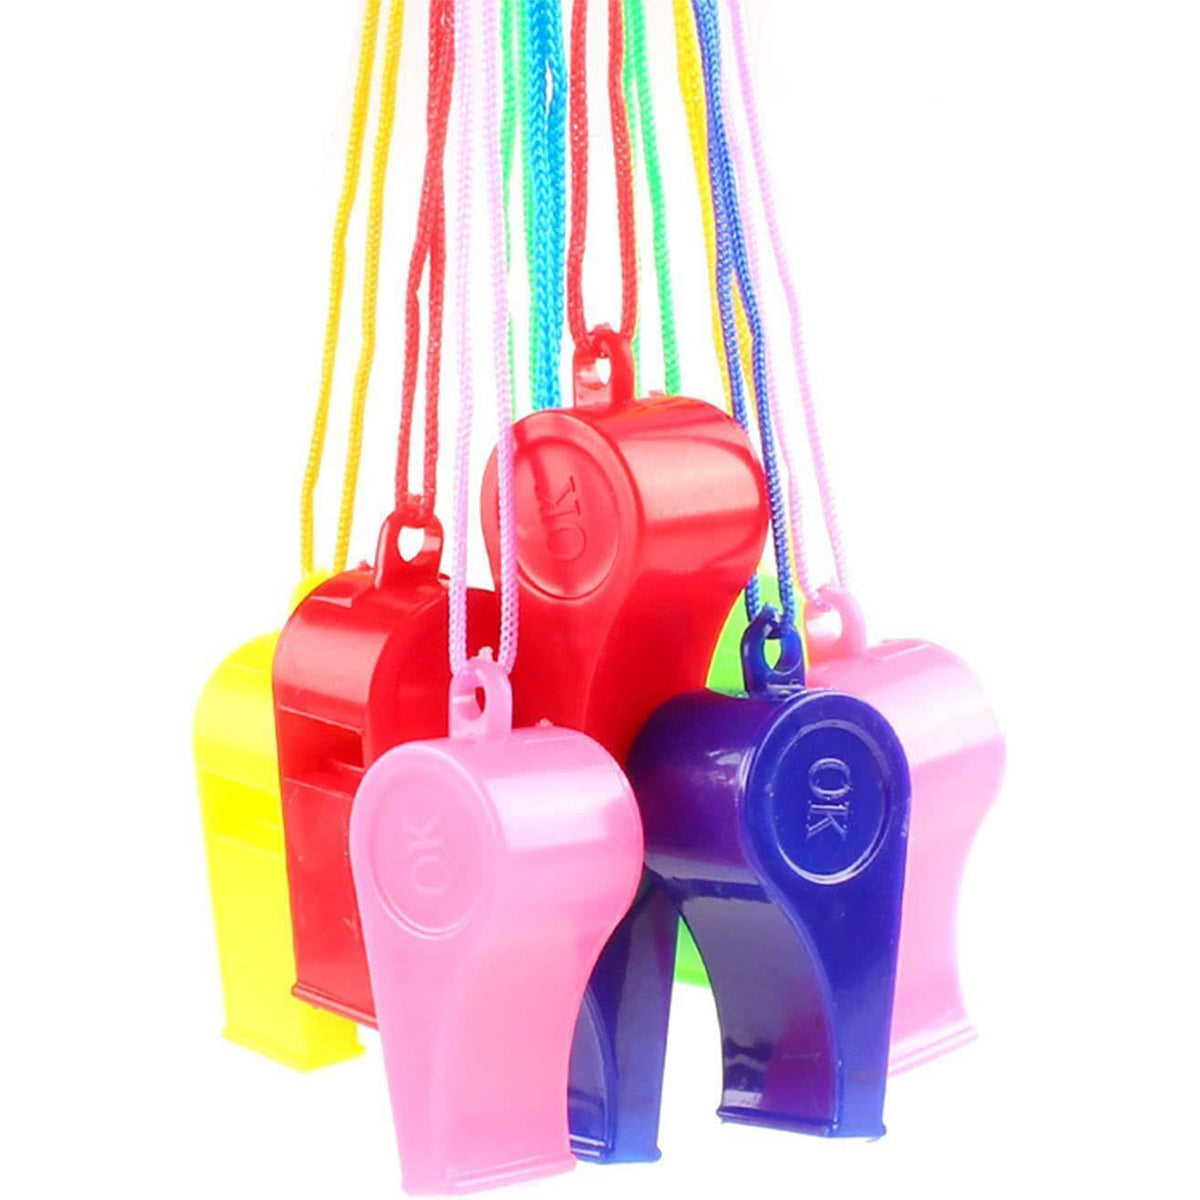 12 Packs of Sports Whistles with Lanyard